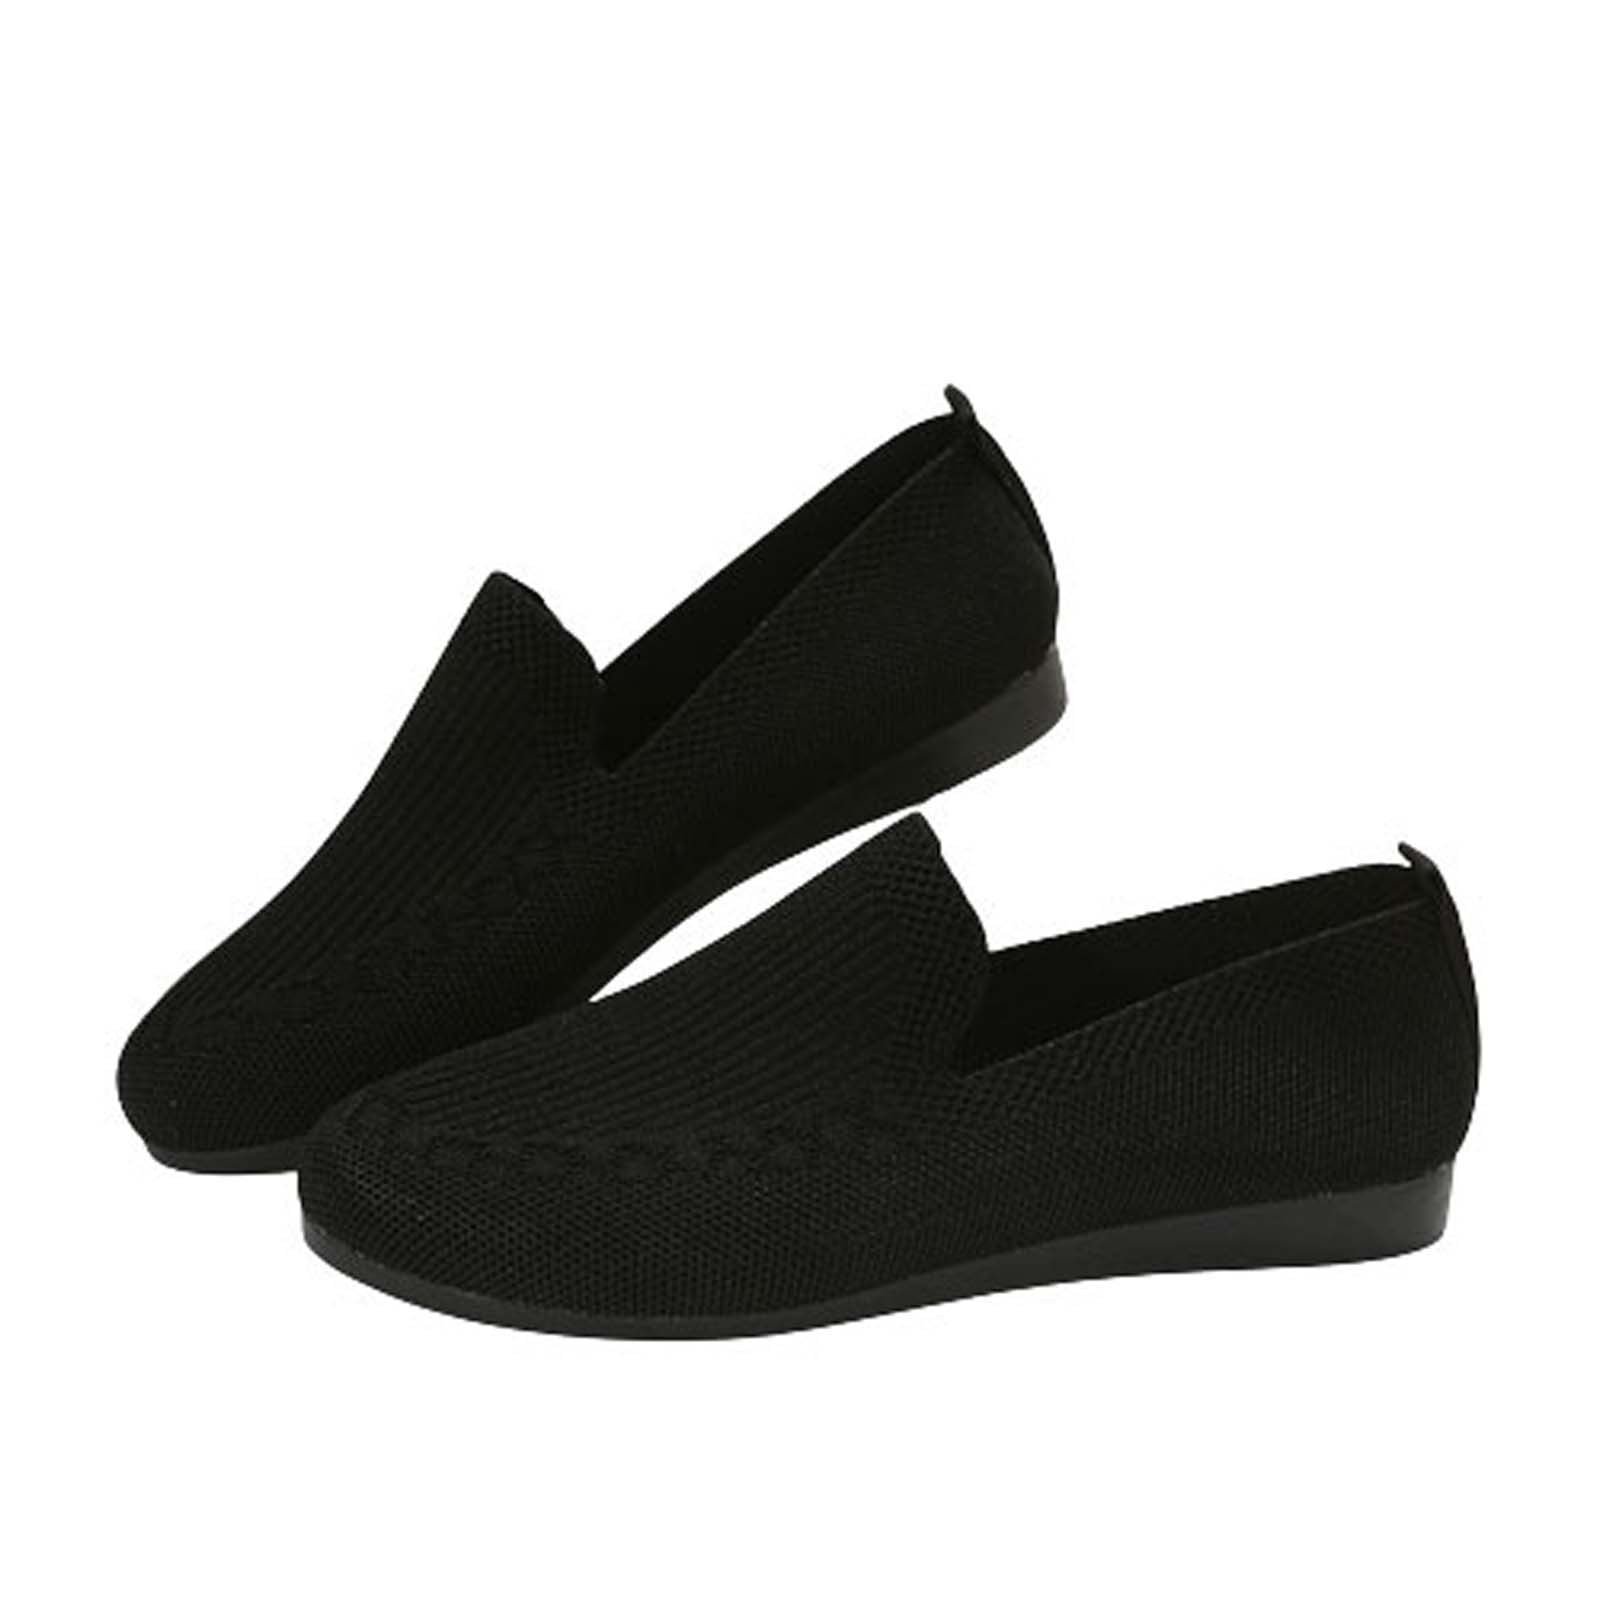 Slip On Shoes for Women Comfort Fall Loafers Comfortable Dressy Flats ...